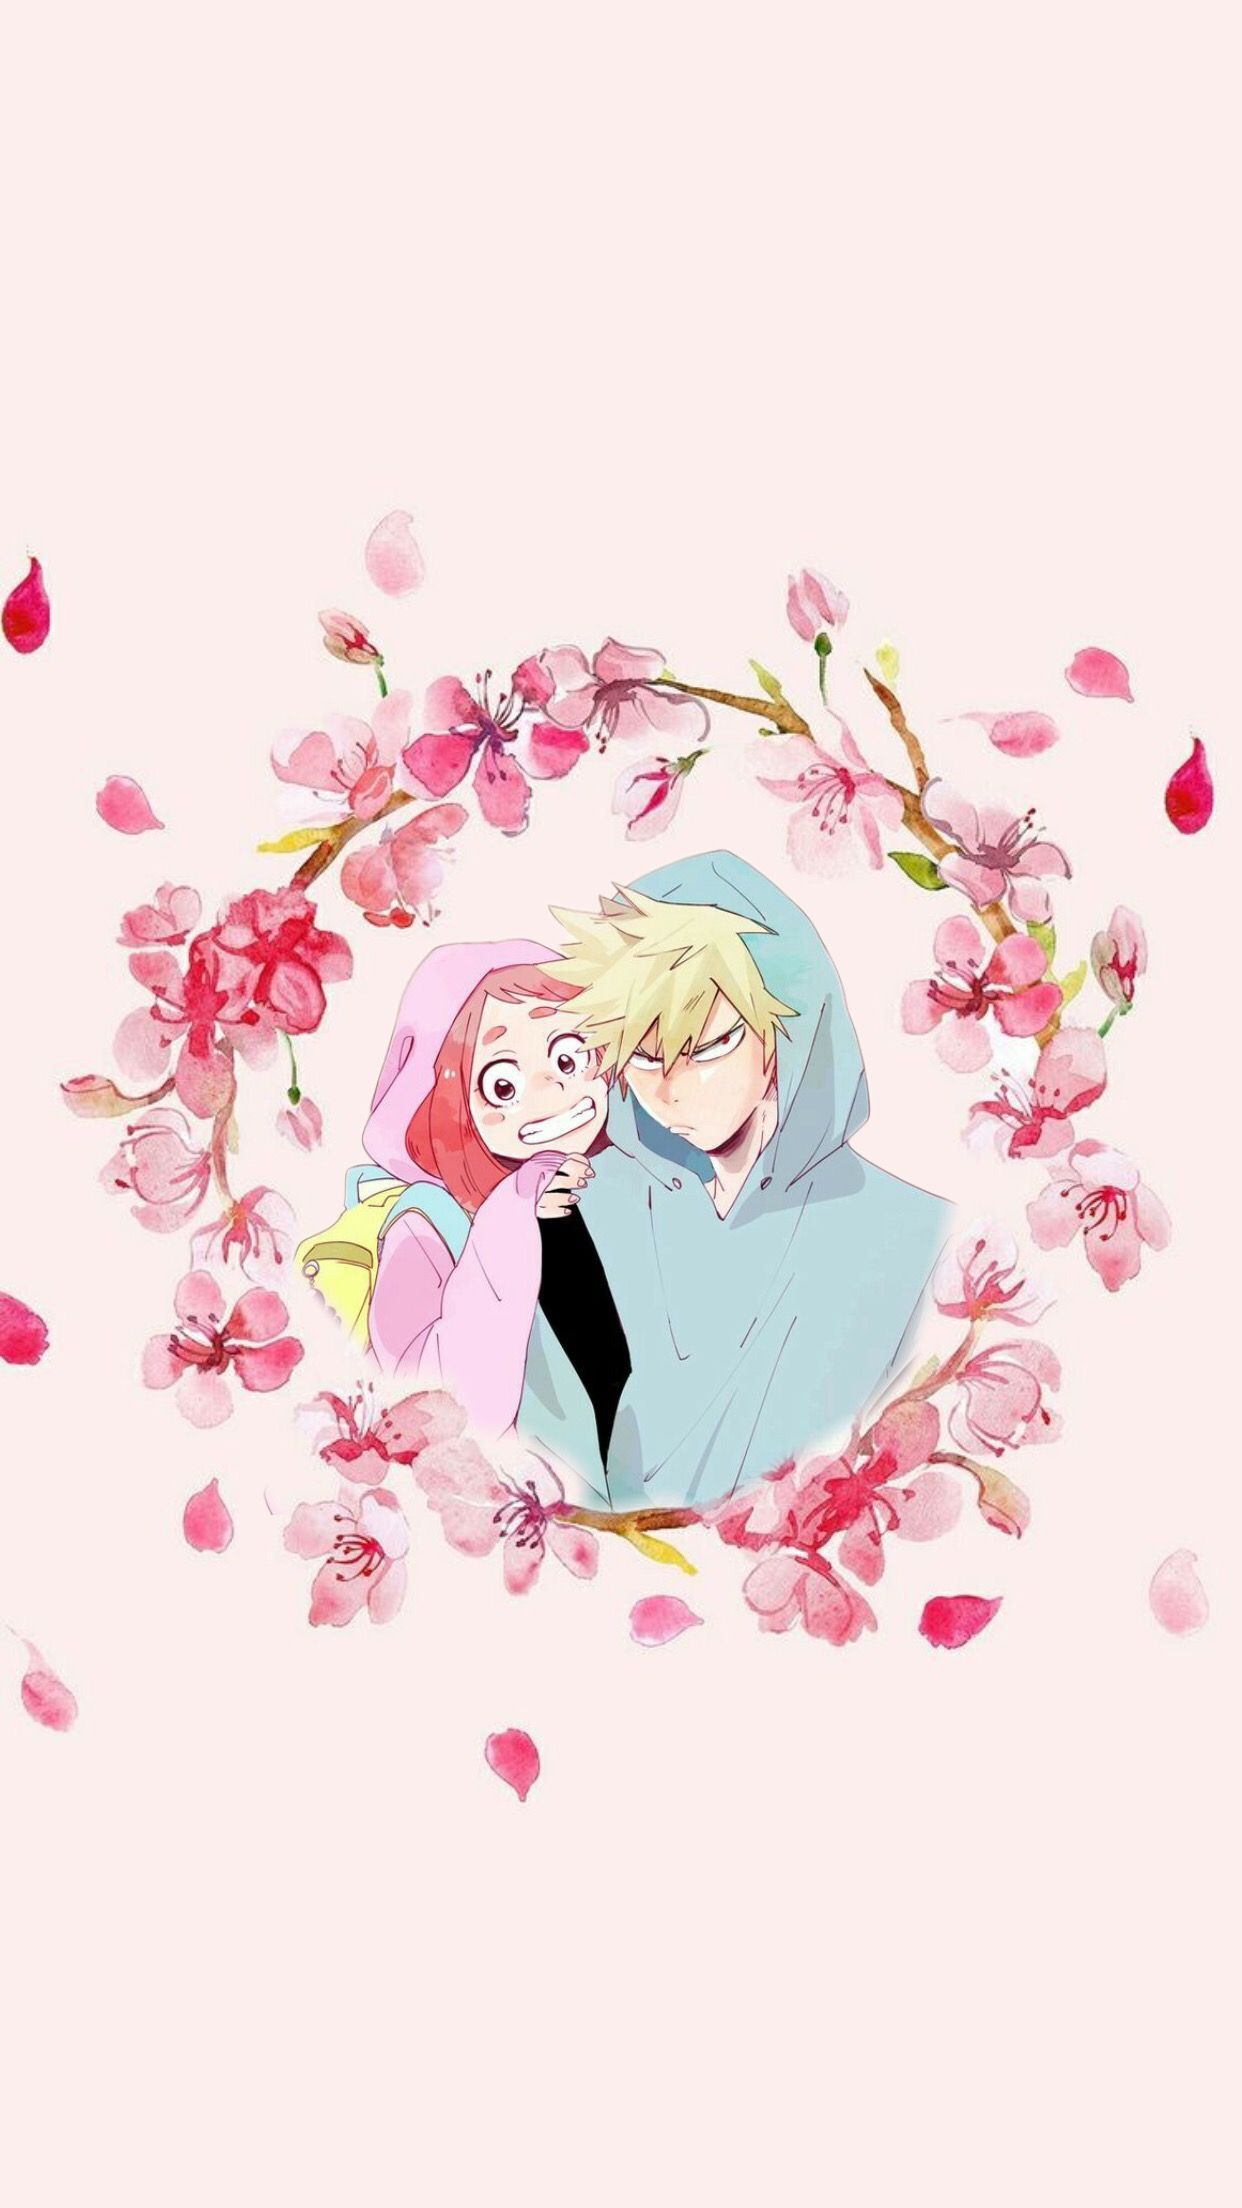 anime icons (@lxwicons) • Instagram photos and videos